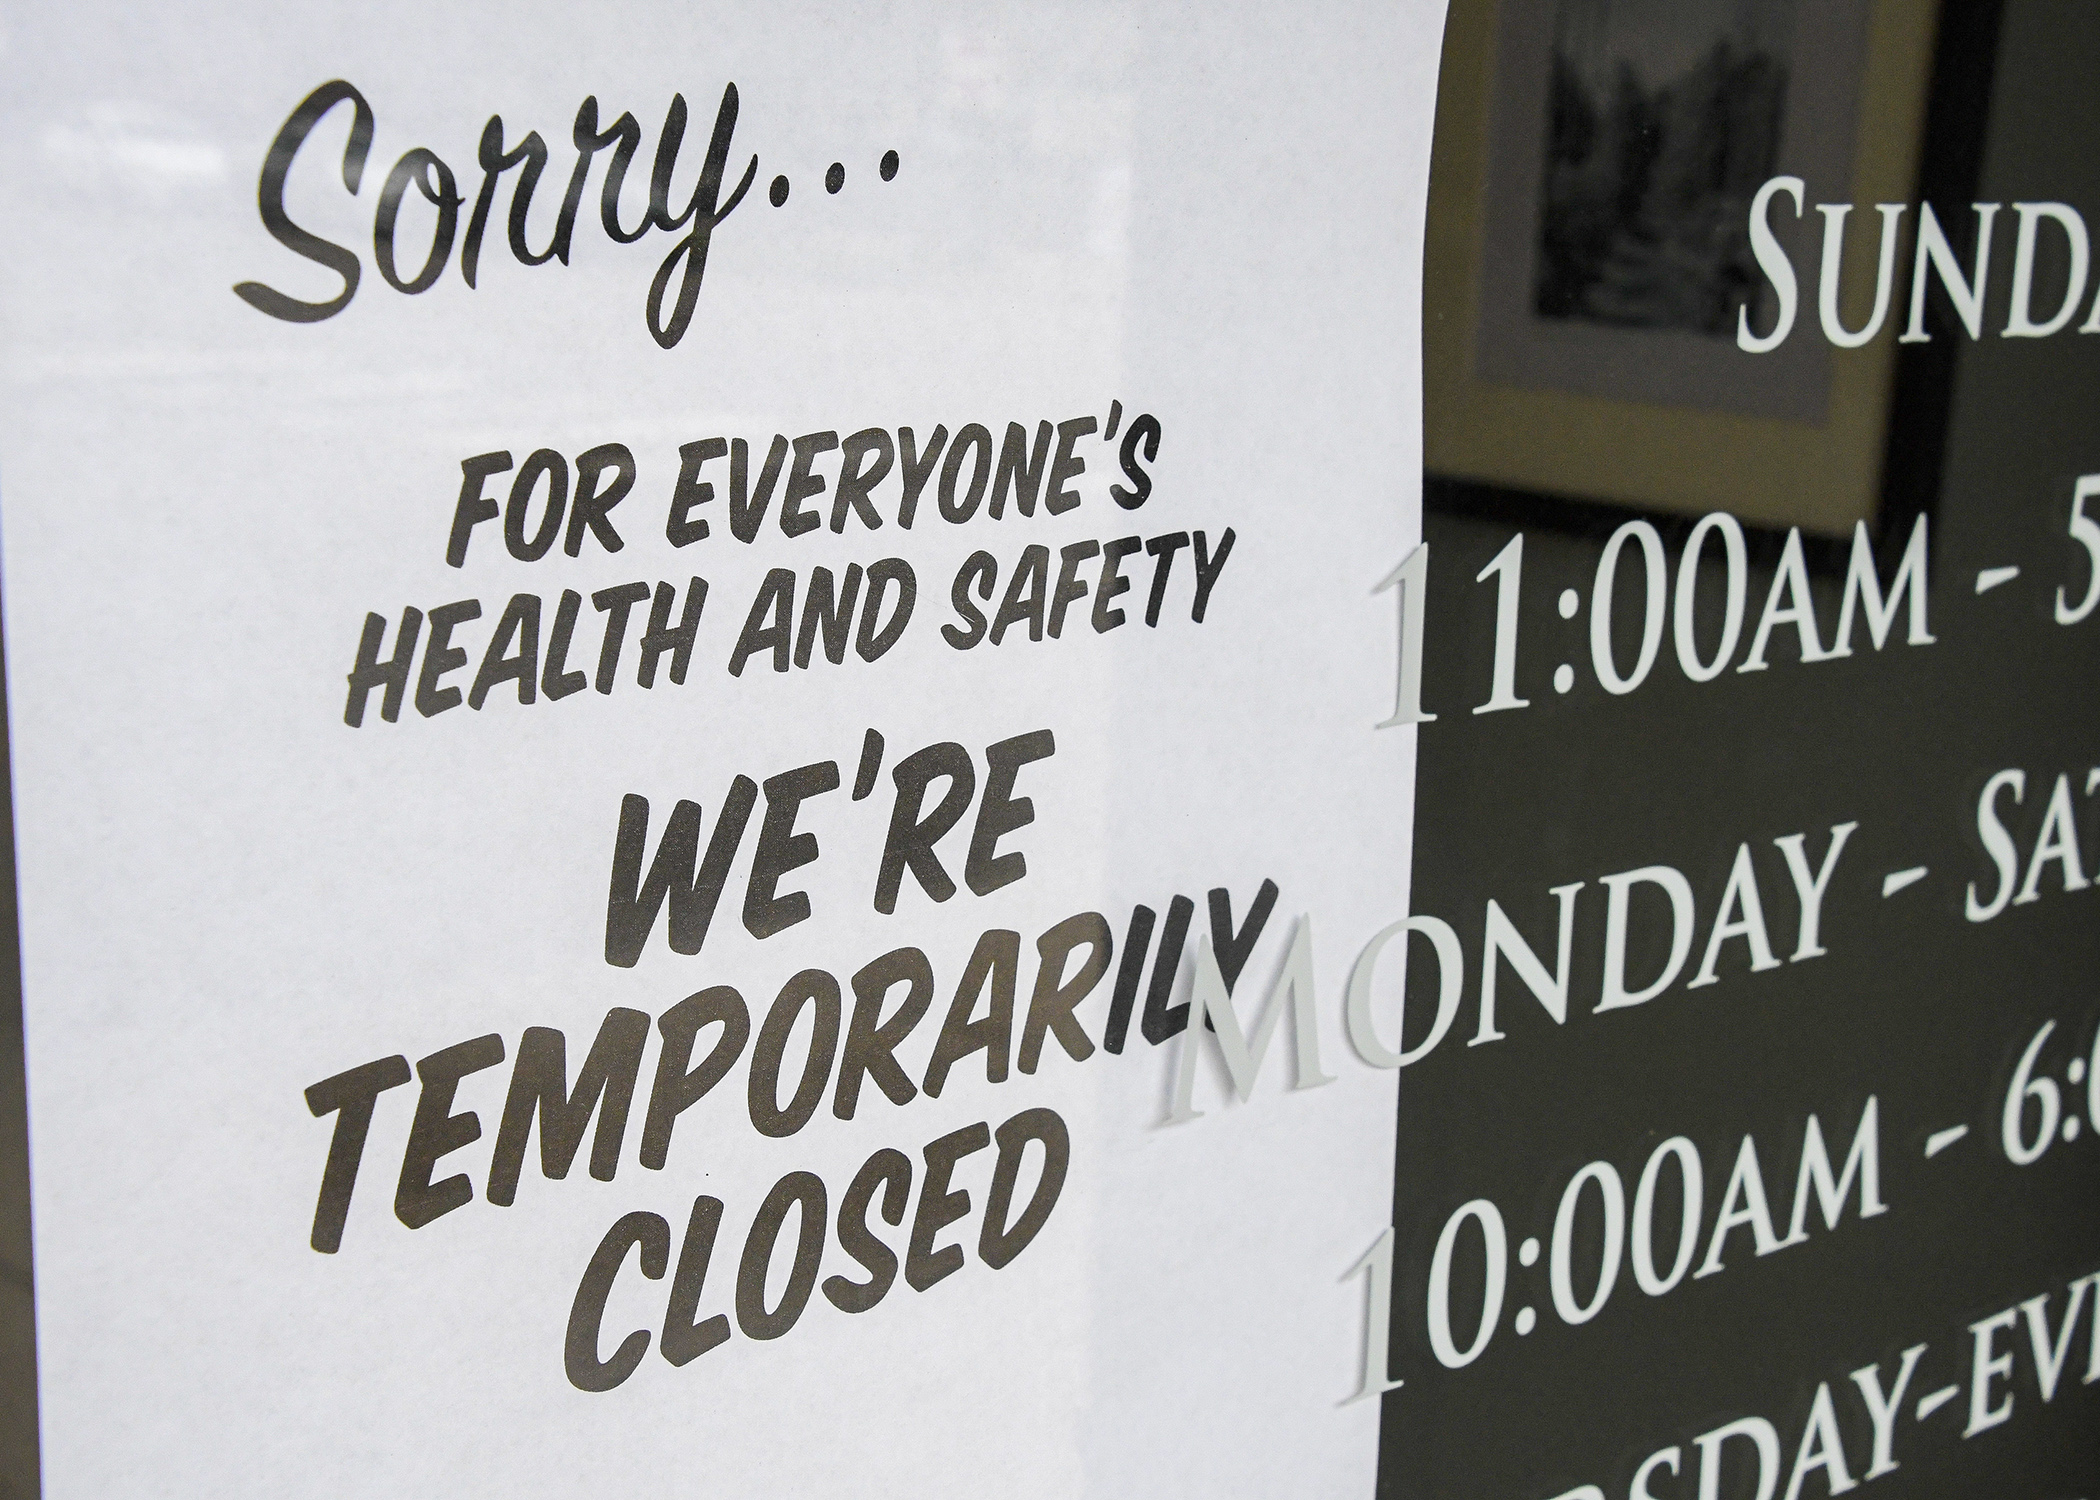 A St. Paul business sits temporarily closed in April 2020. HF4522 proposes to appropriate $100 million from the General Fund for a pandemic relief program targeted at small businesses. (House Photography file photo)